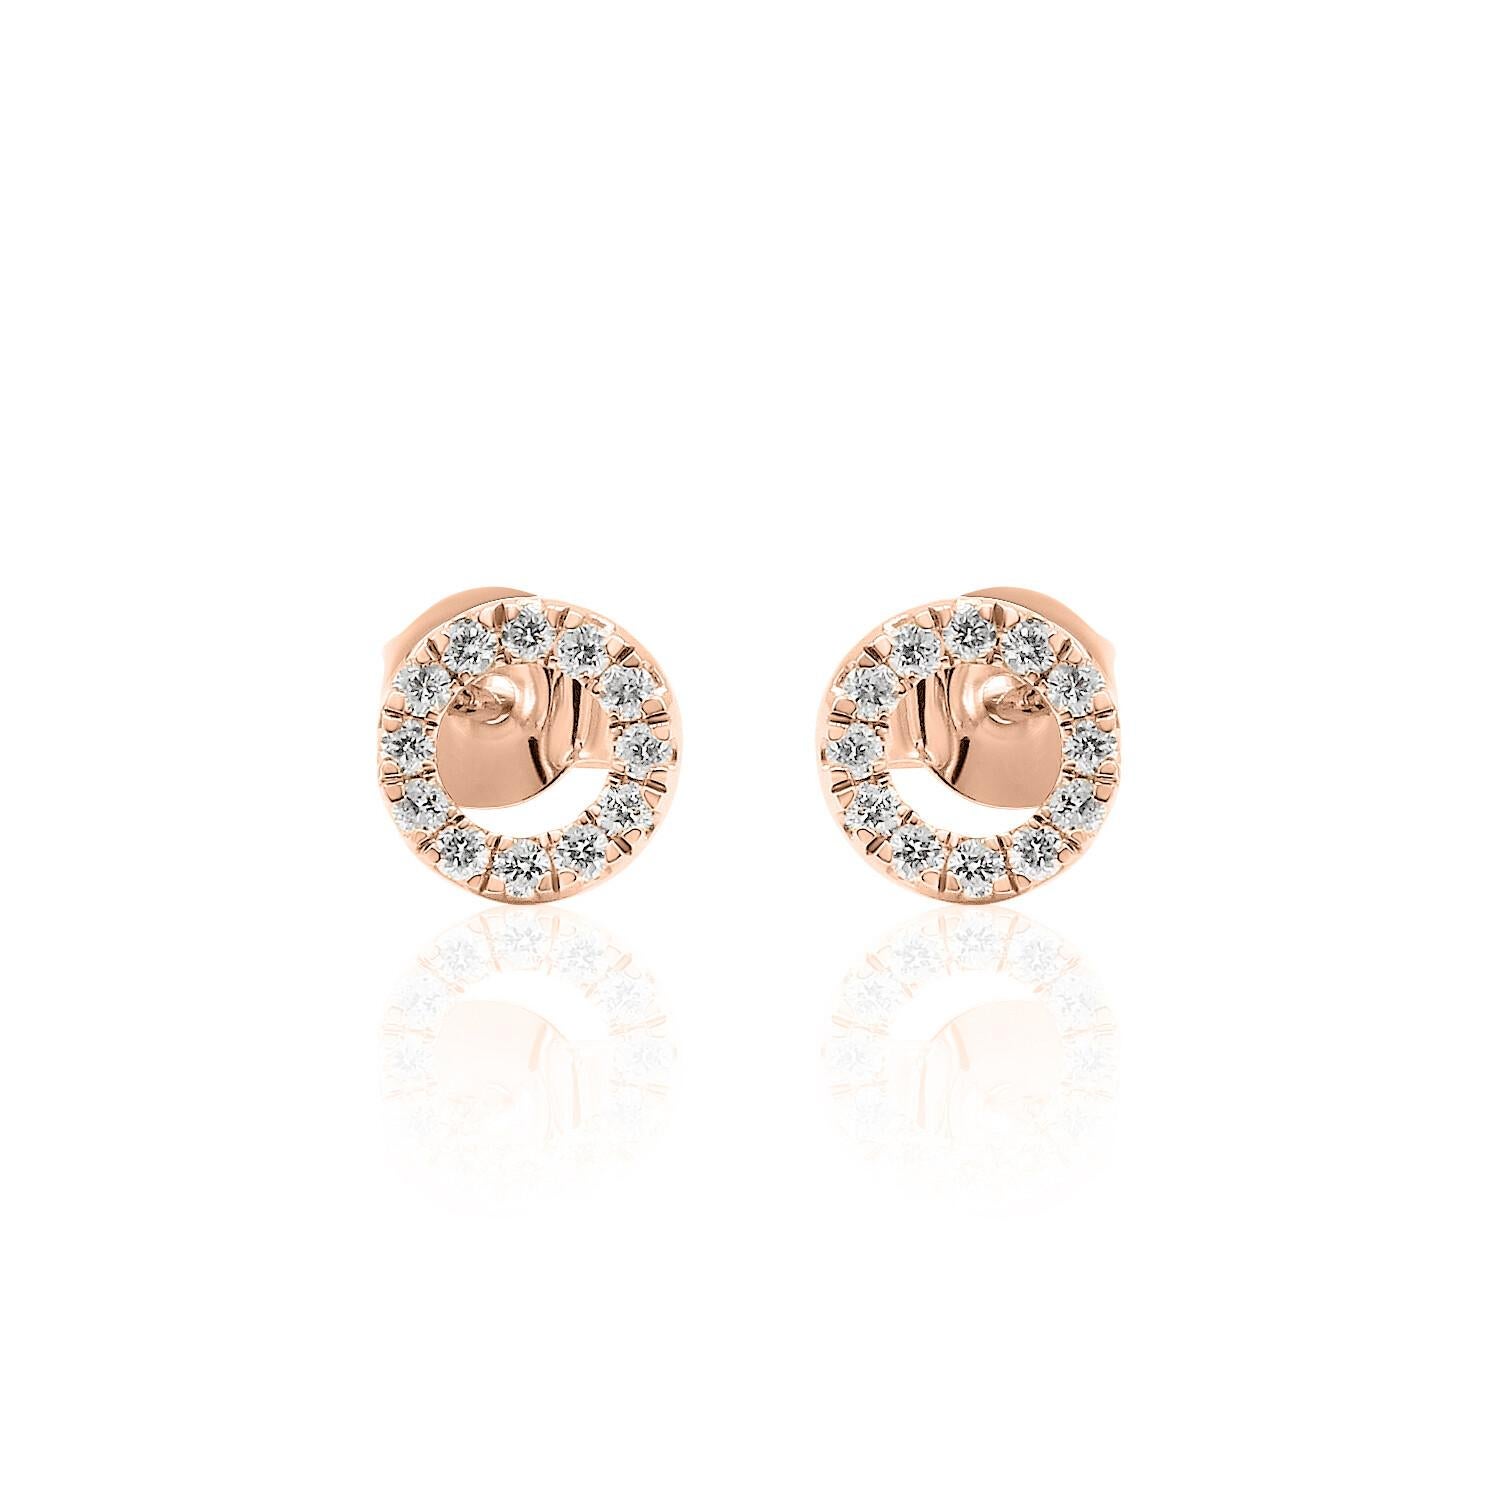 Round Cut Circle Diamond Stud Earrings 14K White, Yellow, and Rose Gold